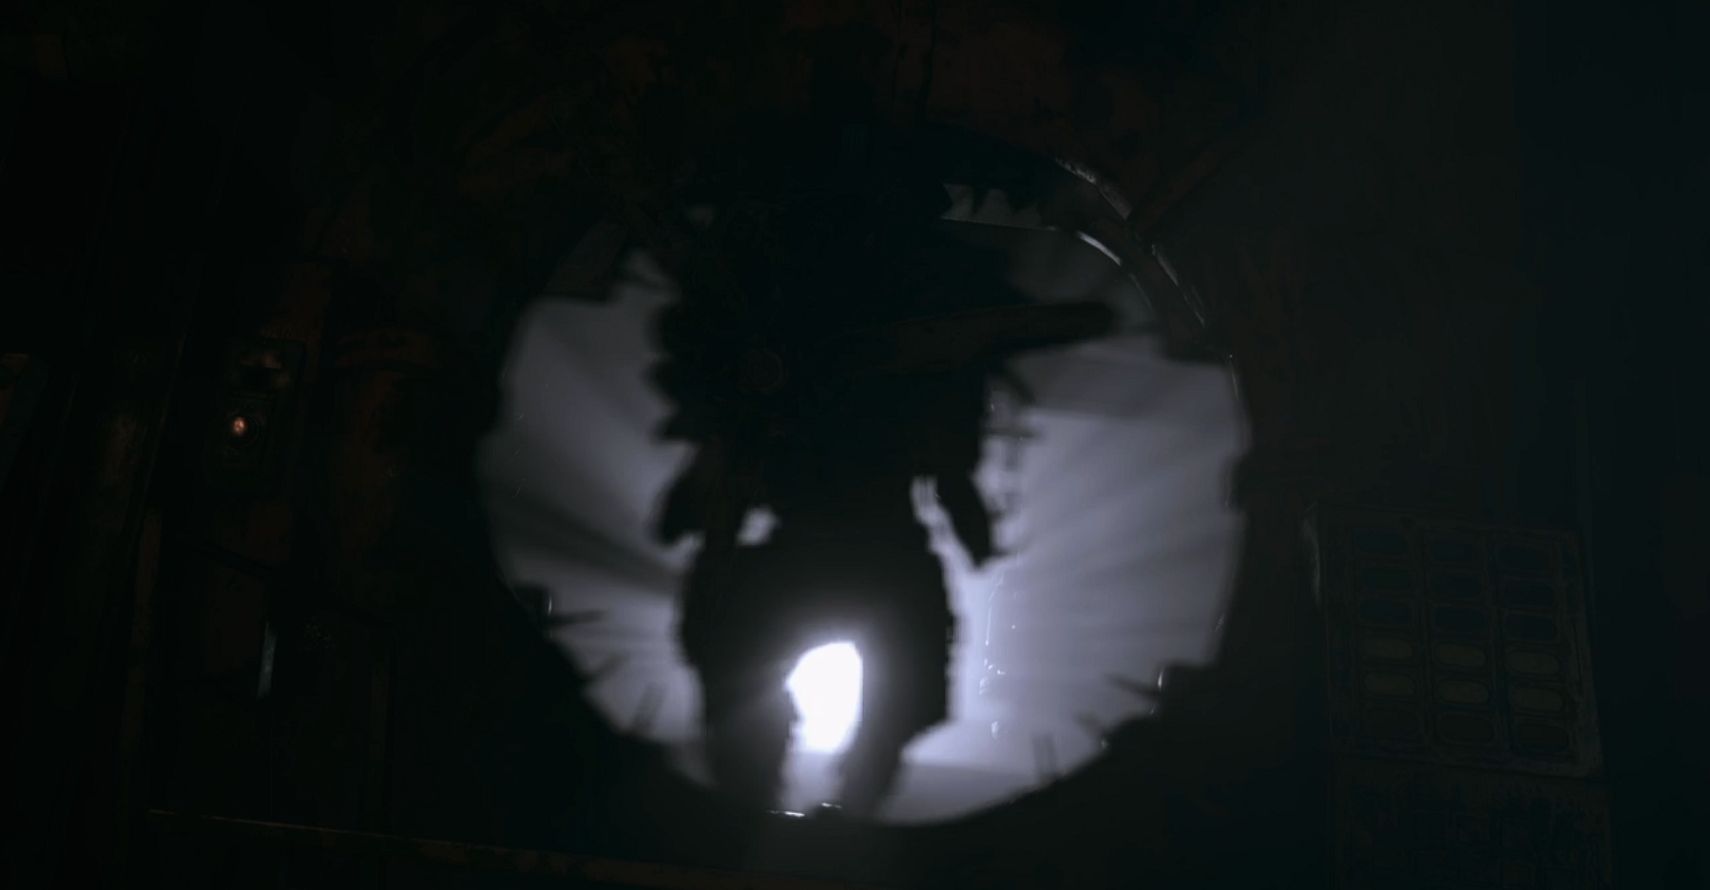 The fan boss emerges from the darkness in Resident Evil Village